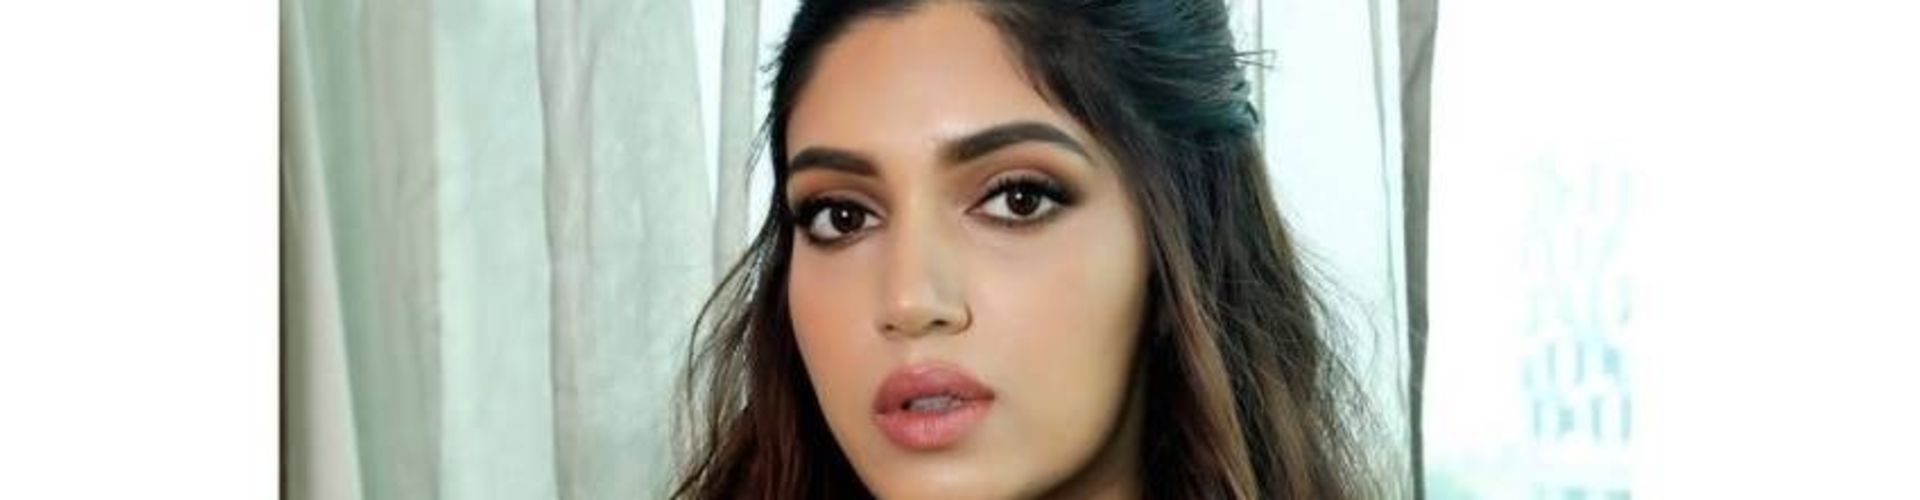 Durgamati Was Quite Challenging And Special Film For Me Says Bhumi Pednekar